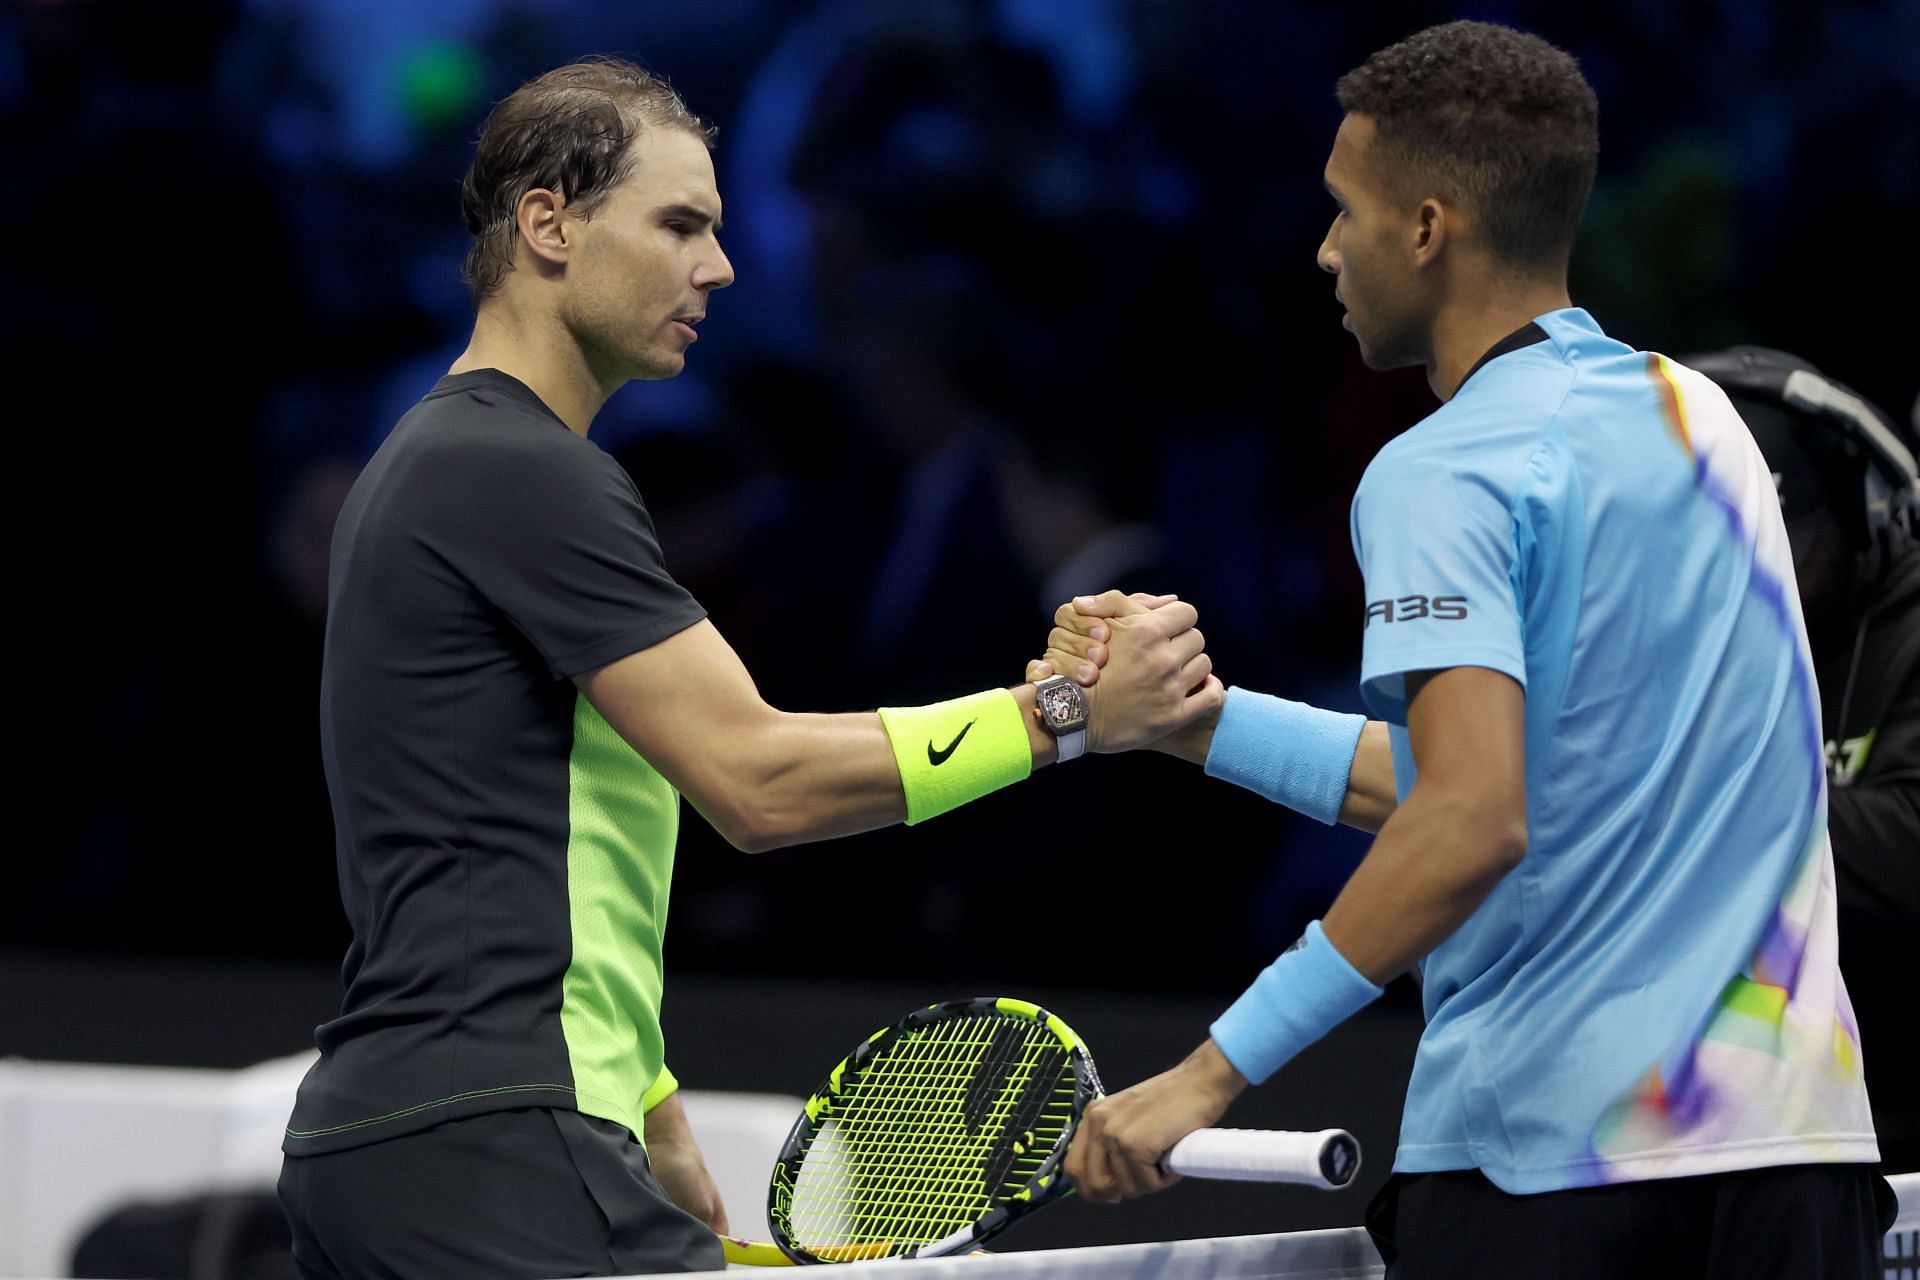 Felix Auger-Aliassime and Rafael Nadal pictured at the 2022 ATP Finals.